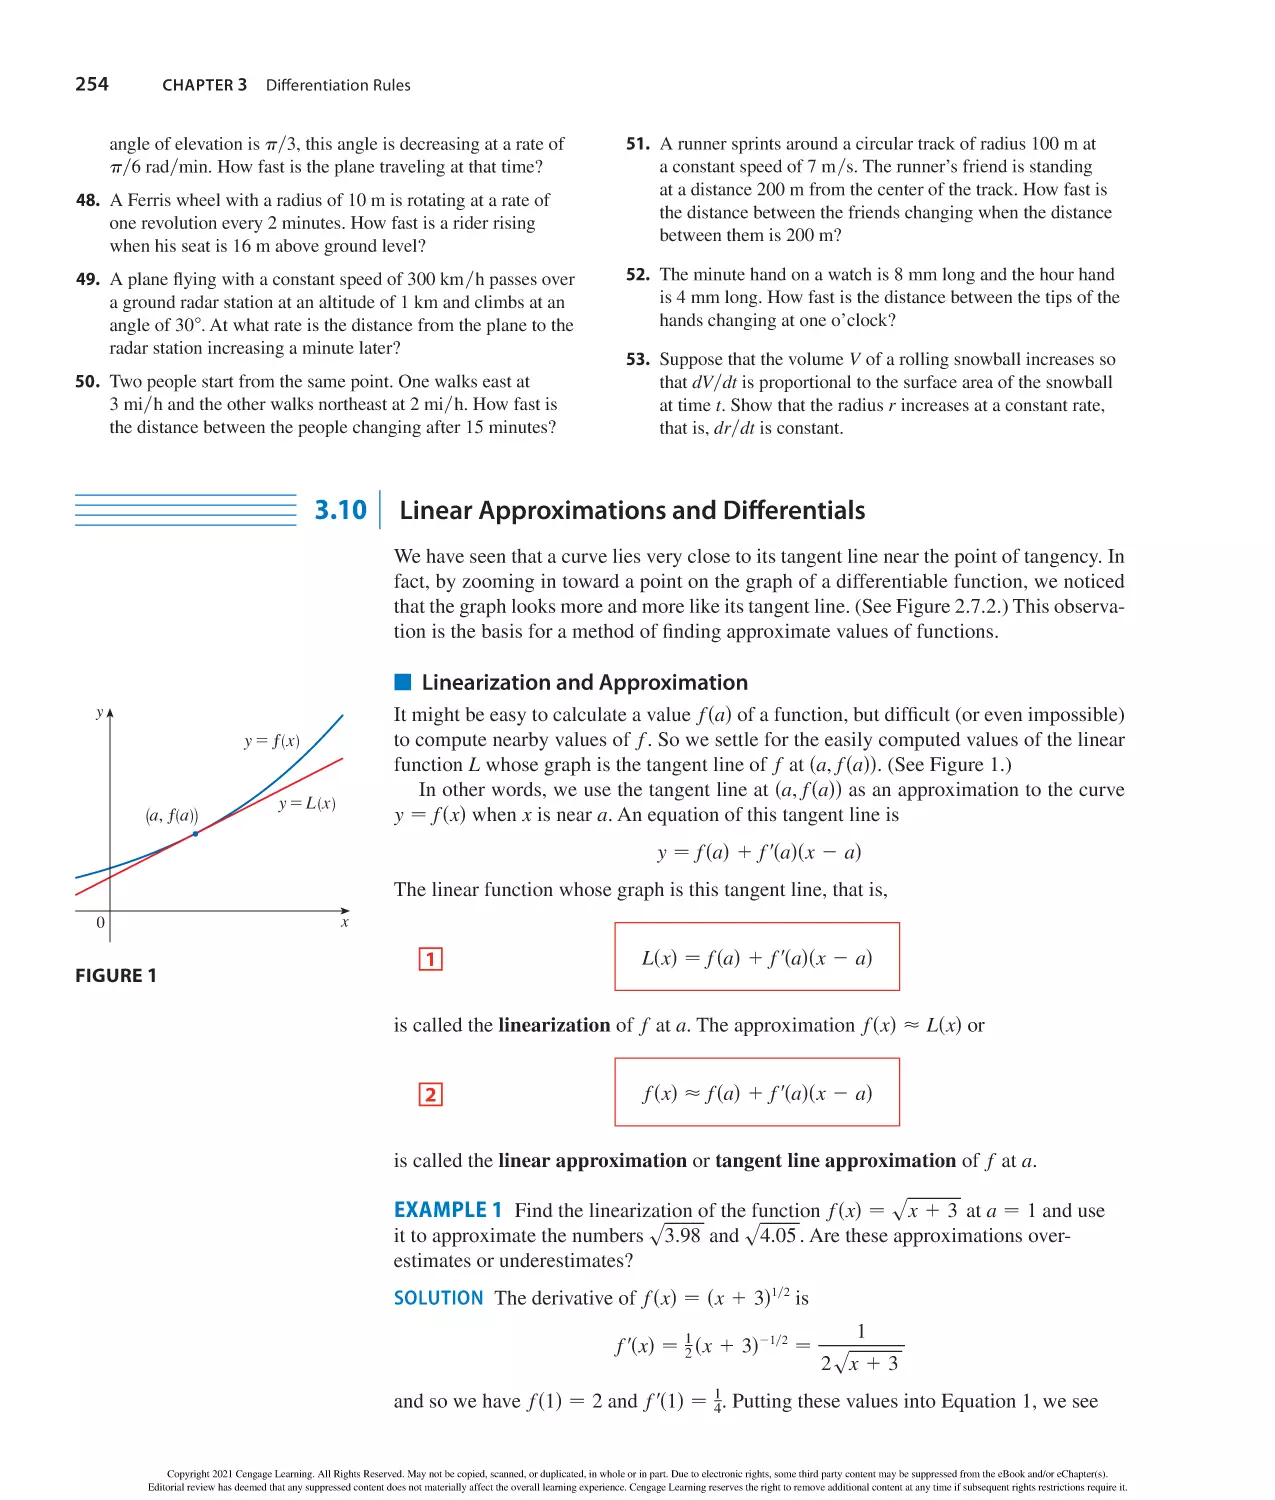 3.10 Linear Approximations and Differentials